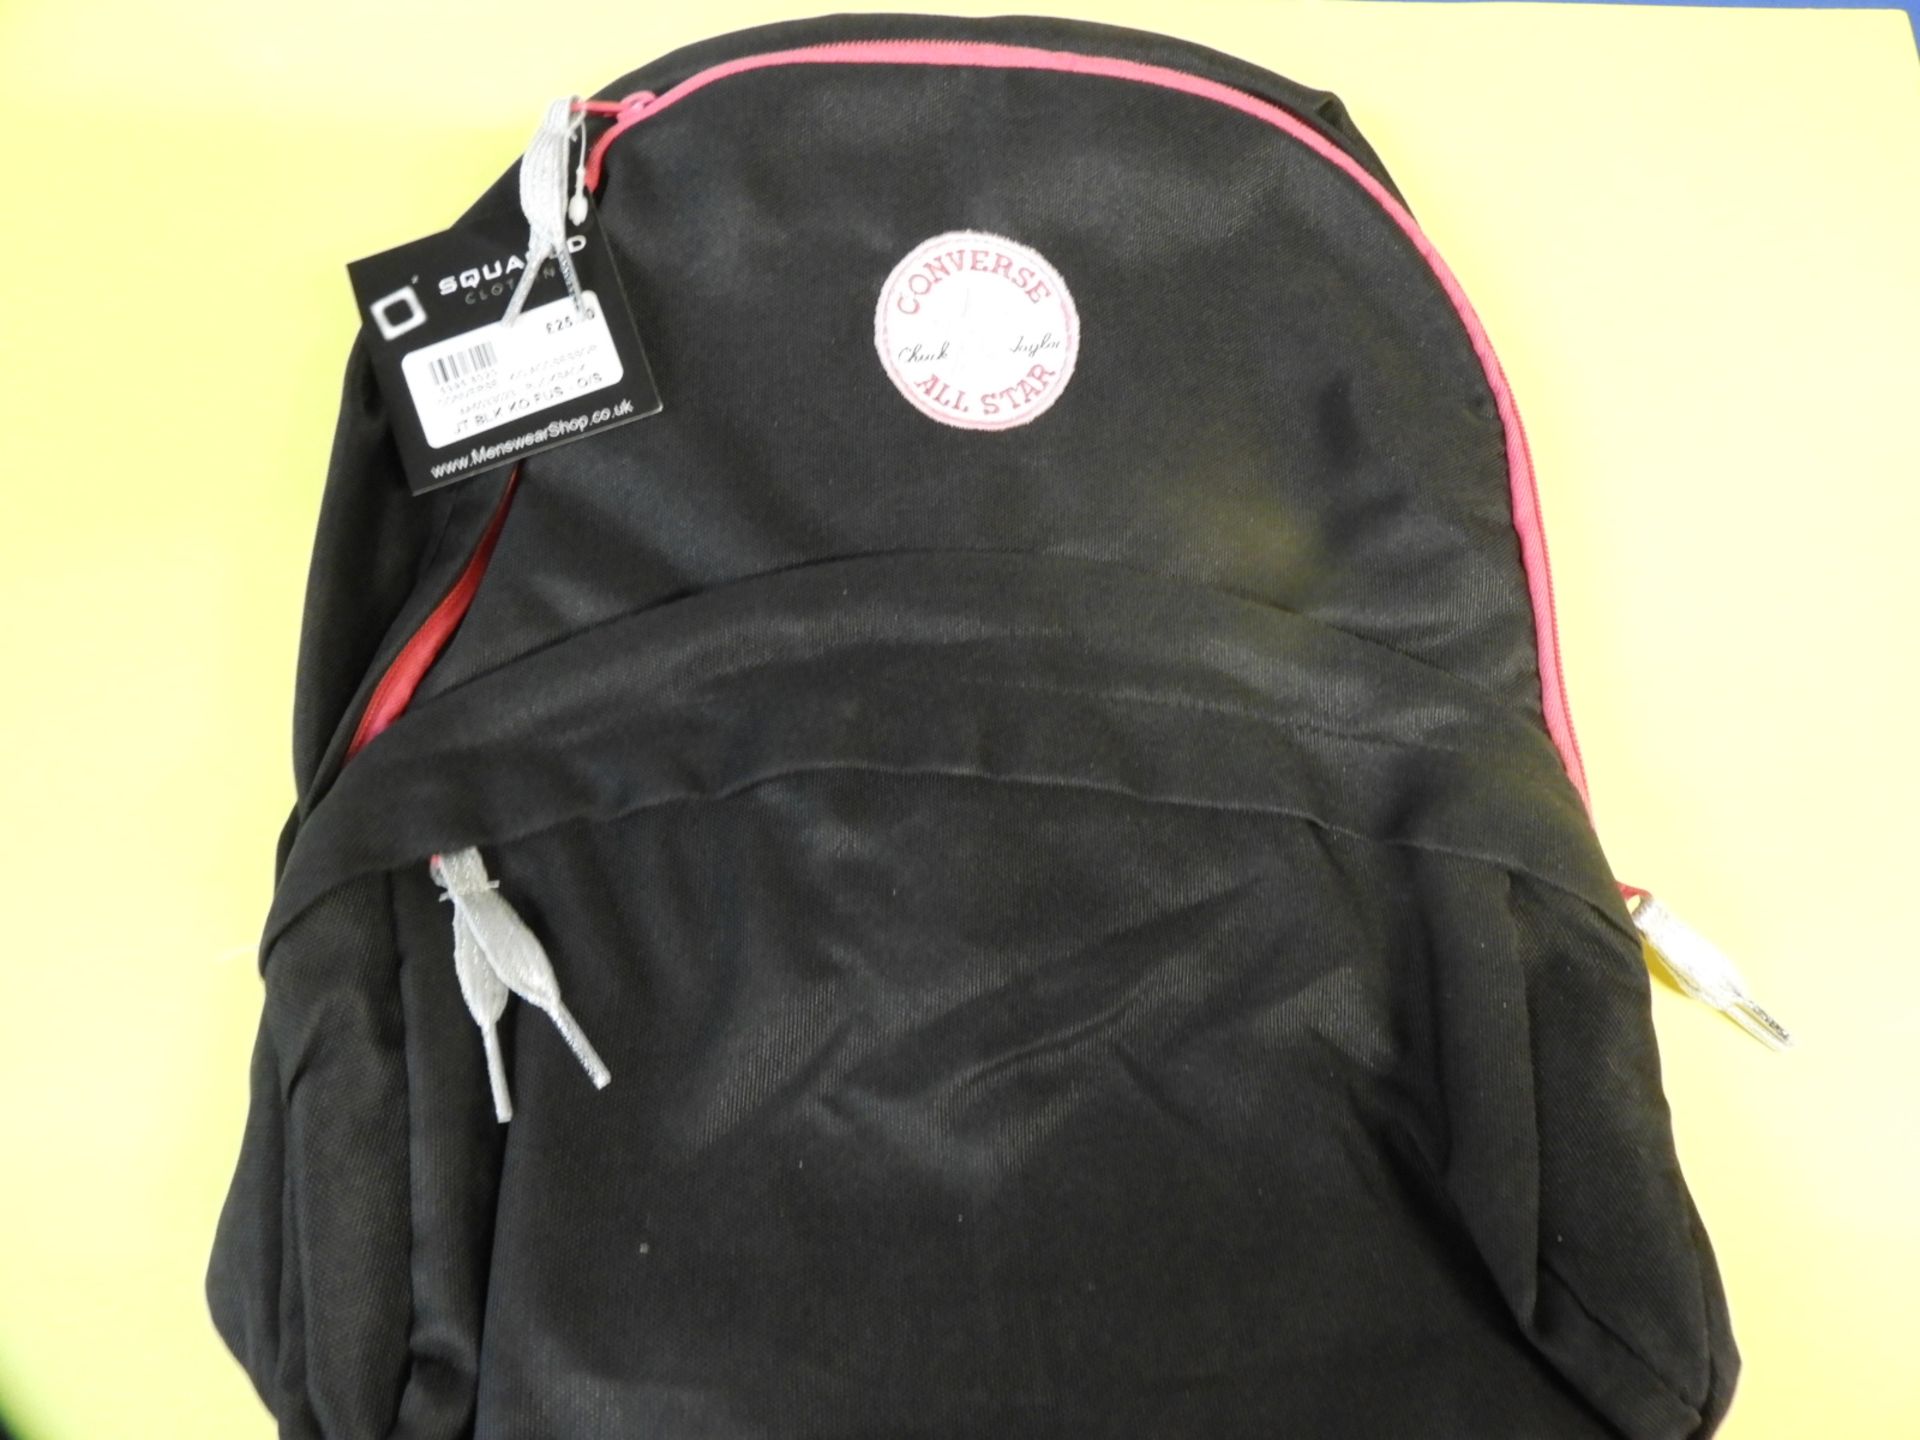 *Converse All Stars Backpack